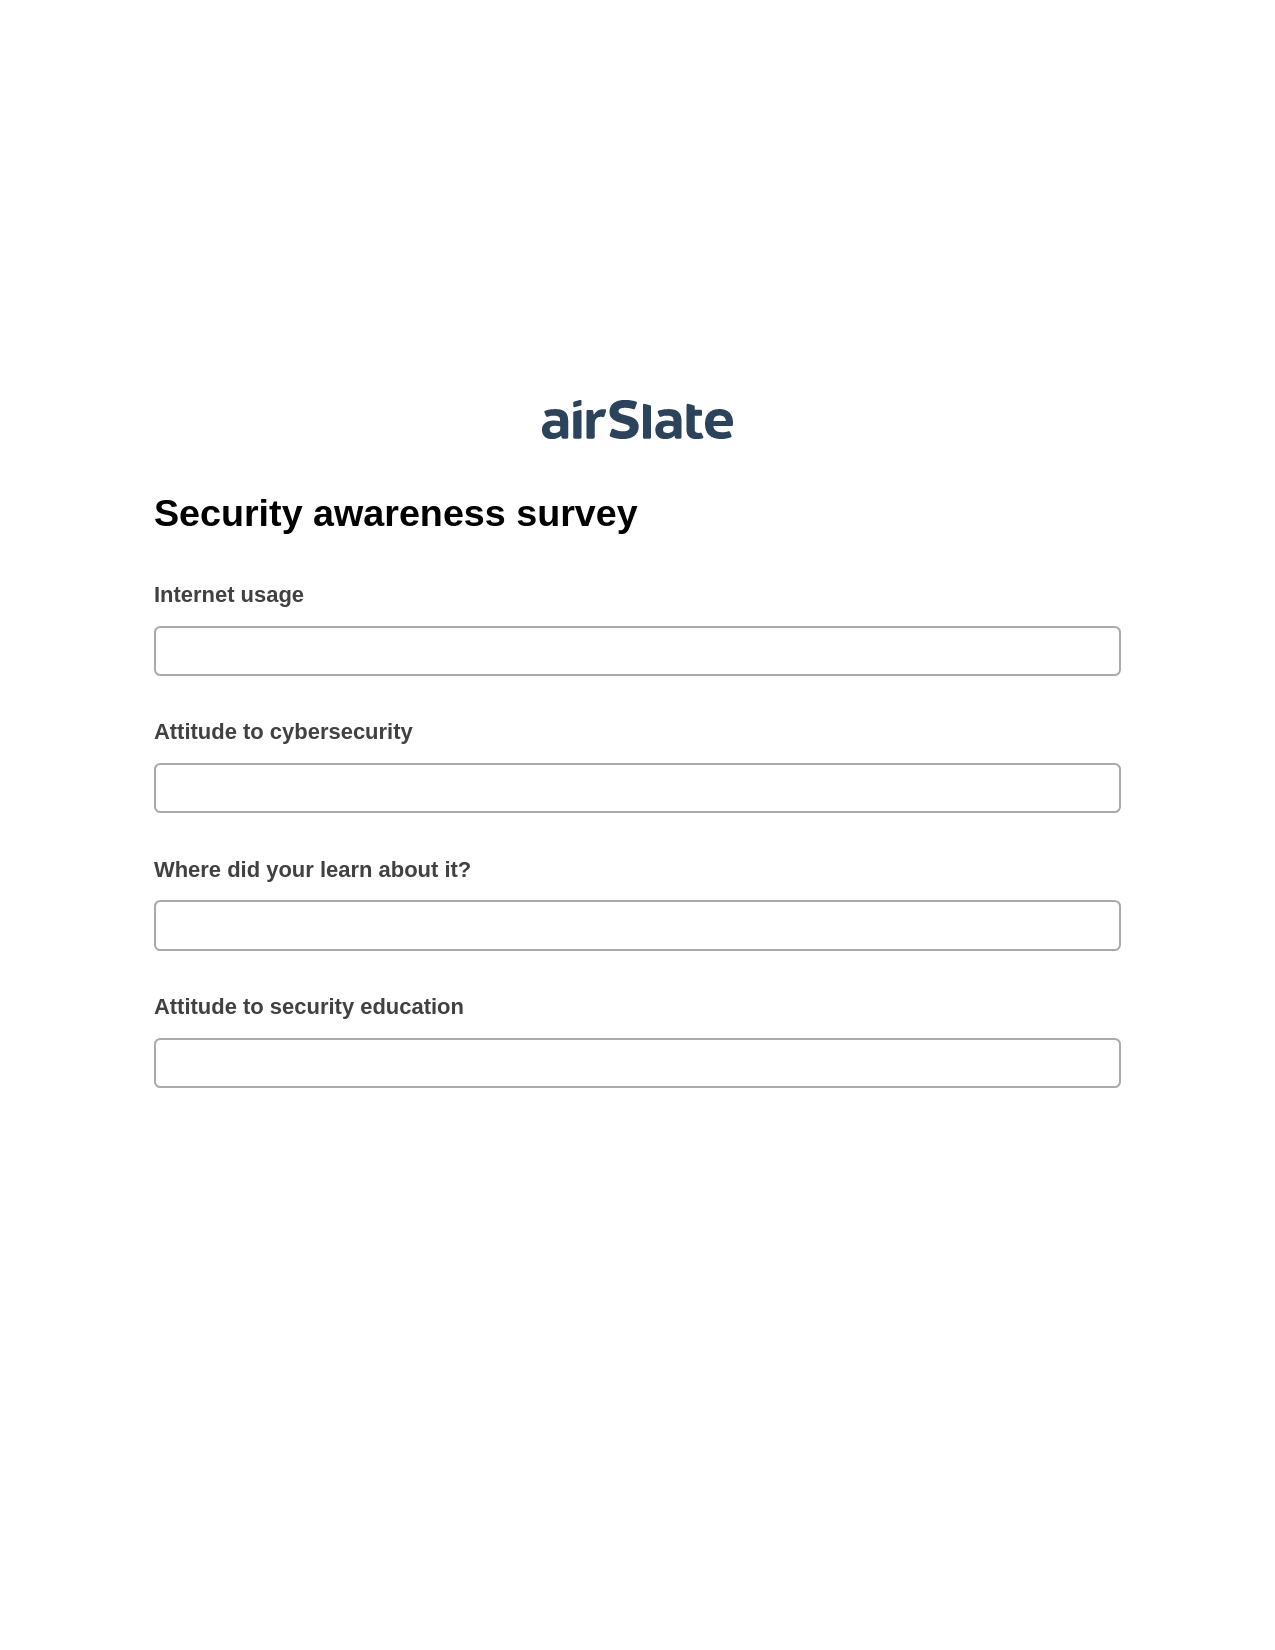 Security awareness survey Pre-fill from Excel Spreadsheet Bot, Jira Bot, Post-finish Document Bot